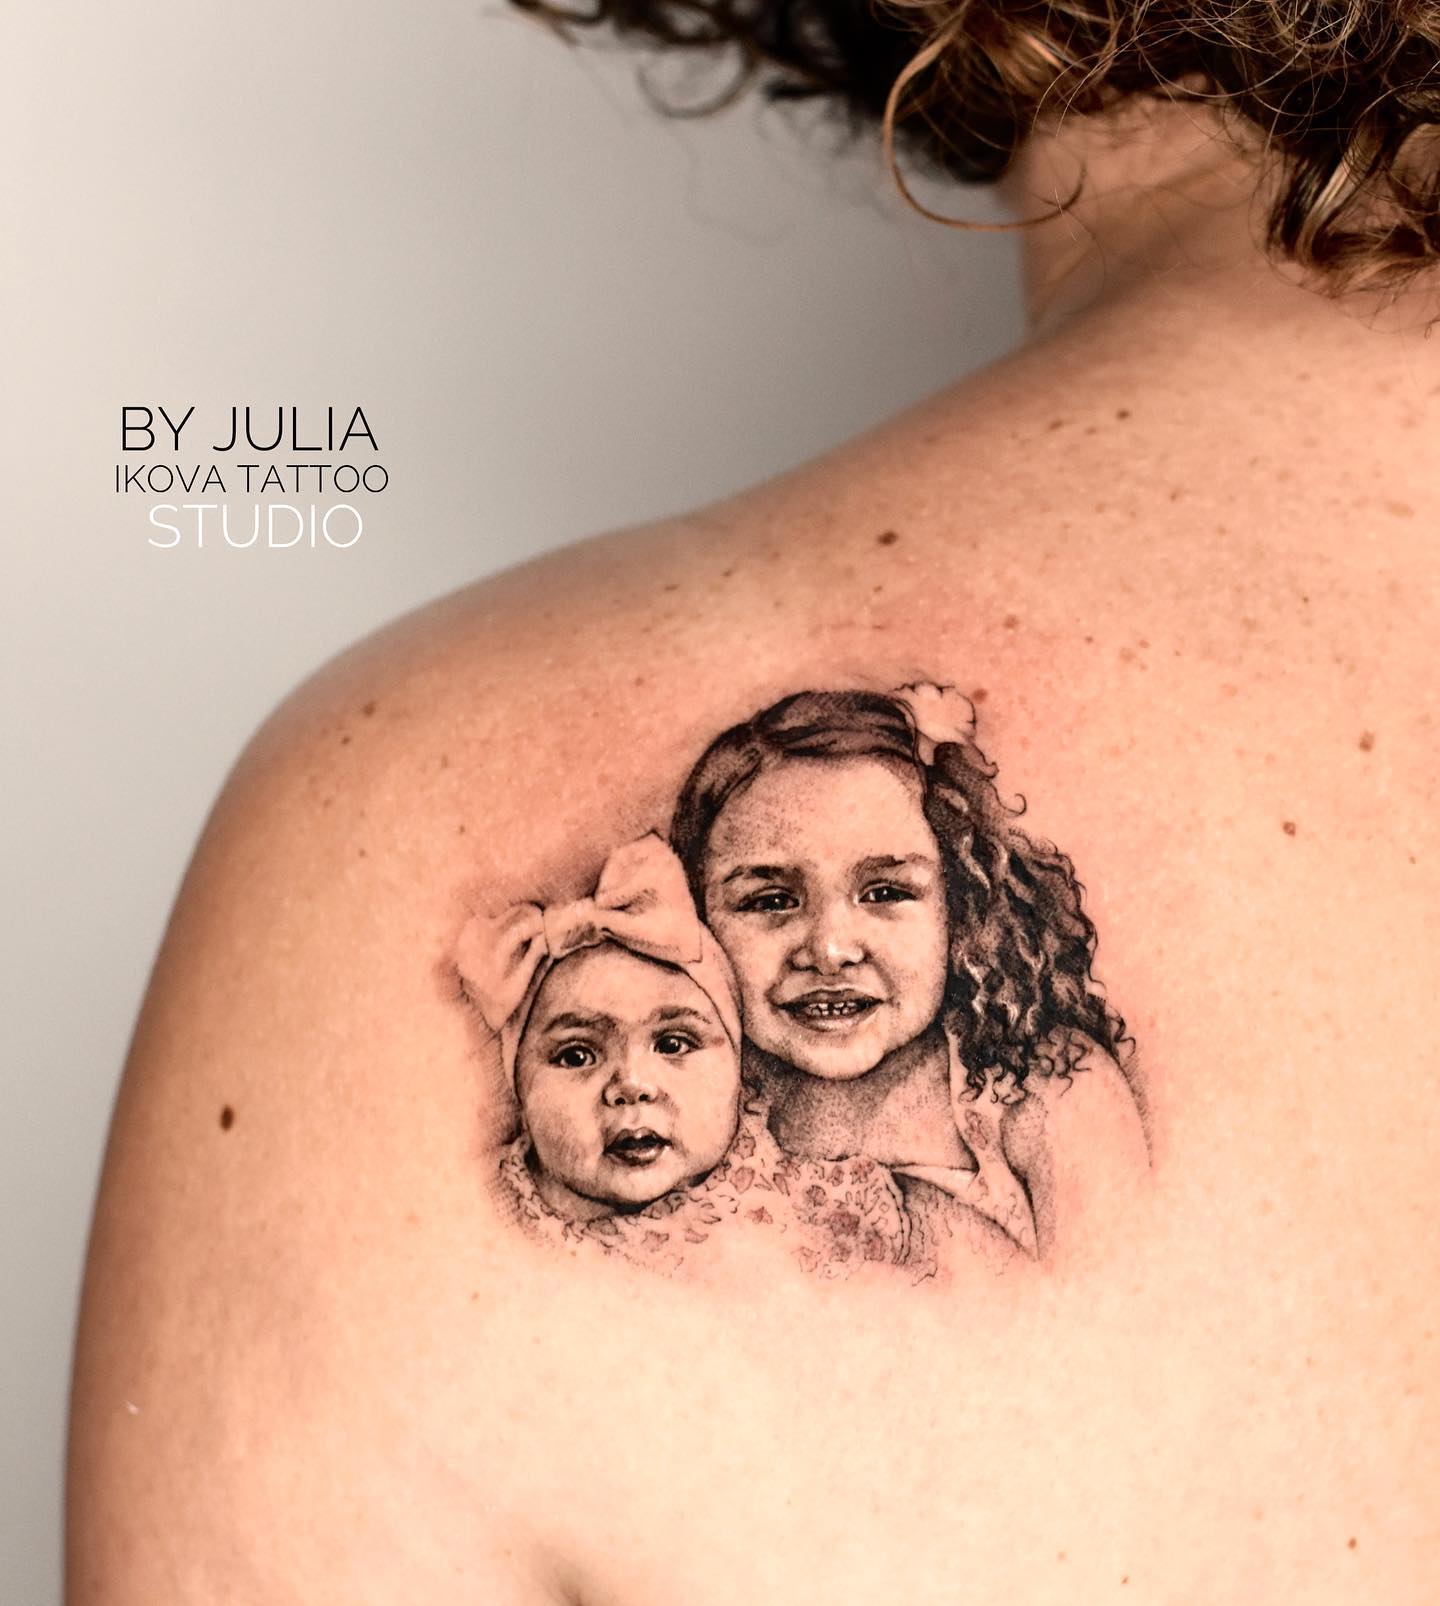 You can dedicate your shoulder tattoo to someone special and important in your life. Show how close you are to your little ones with this portrait on your shoulders.